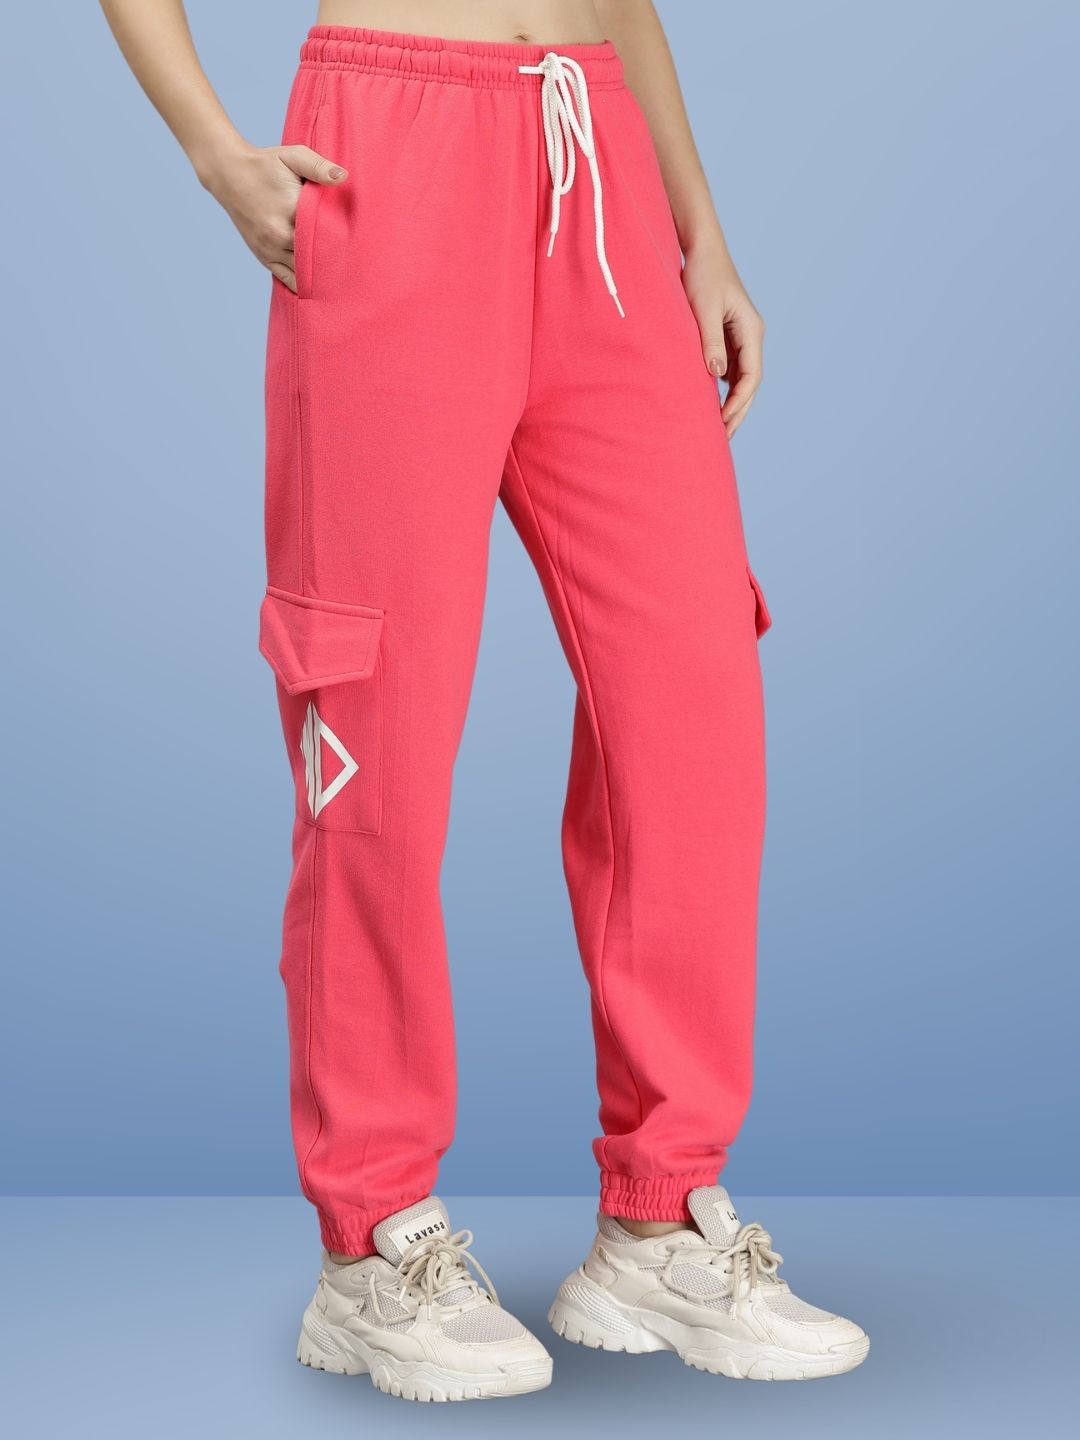 Tokyo Relaxed Fit 4 Pocket Joggers (Flamingo Pink) - Wearduds